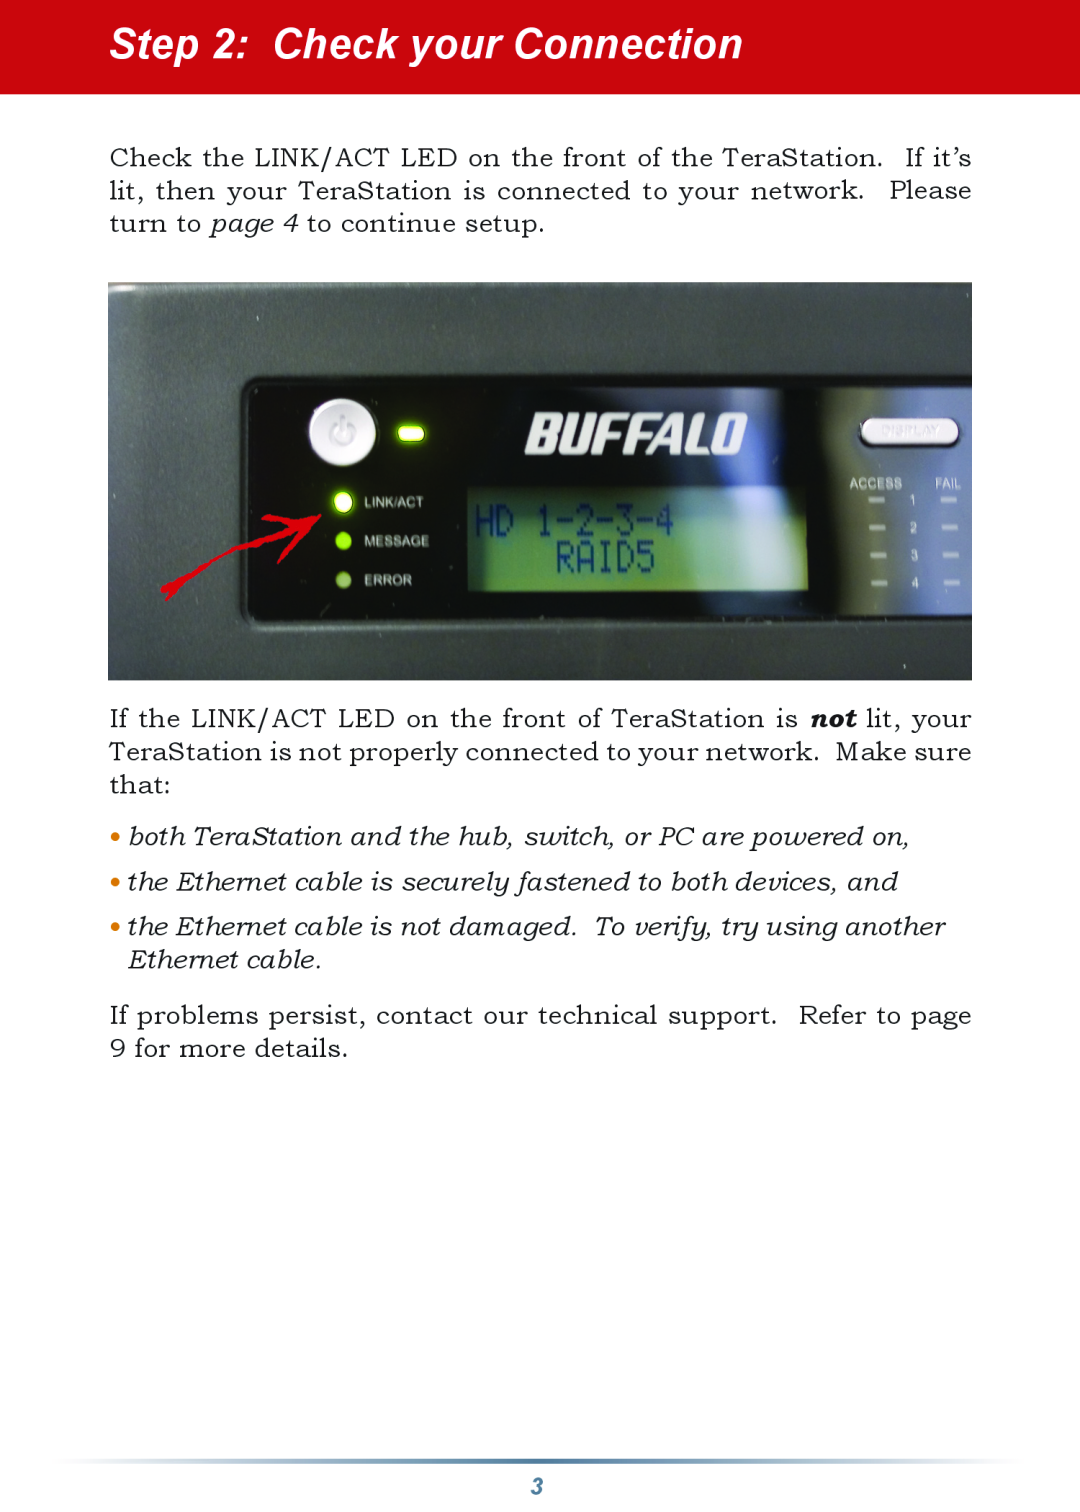 Buffalo Technology none setup guide Check your Connection, both TeraStation and the hub, switch, or PC are powered on 